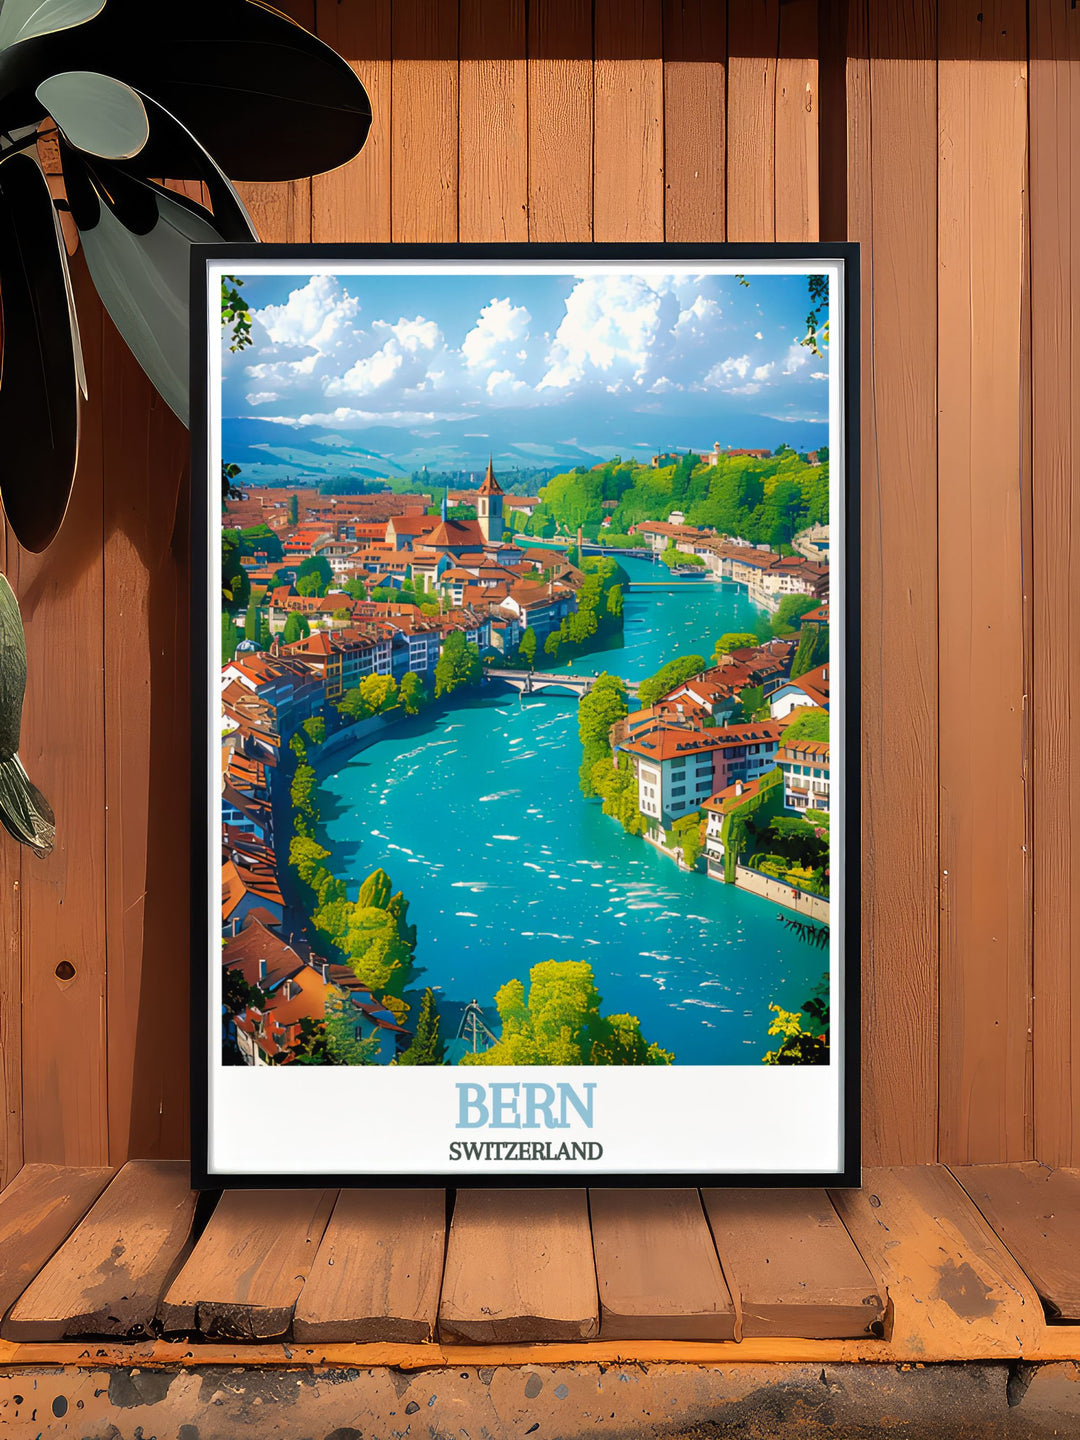 Berns iconic Federal Palace and the surrounding Swiss Alps are beautifully depicted in this art print, making it a versatile piece for any home decor.